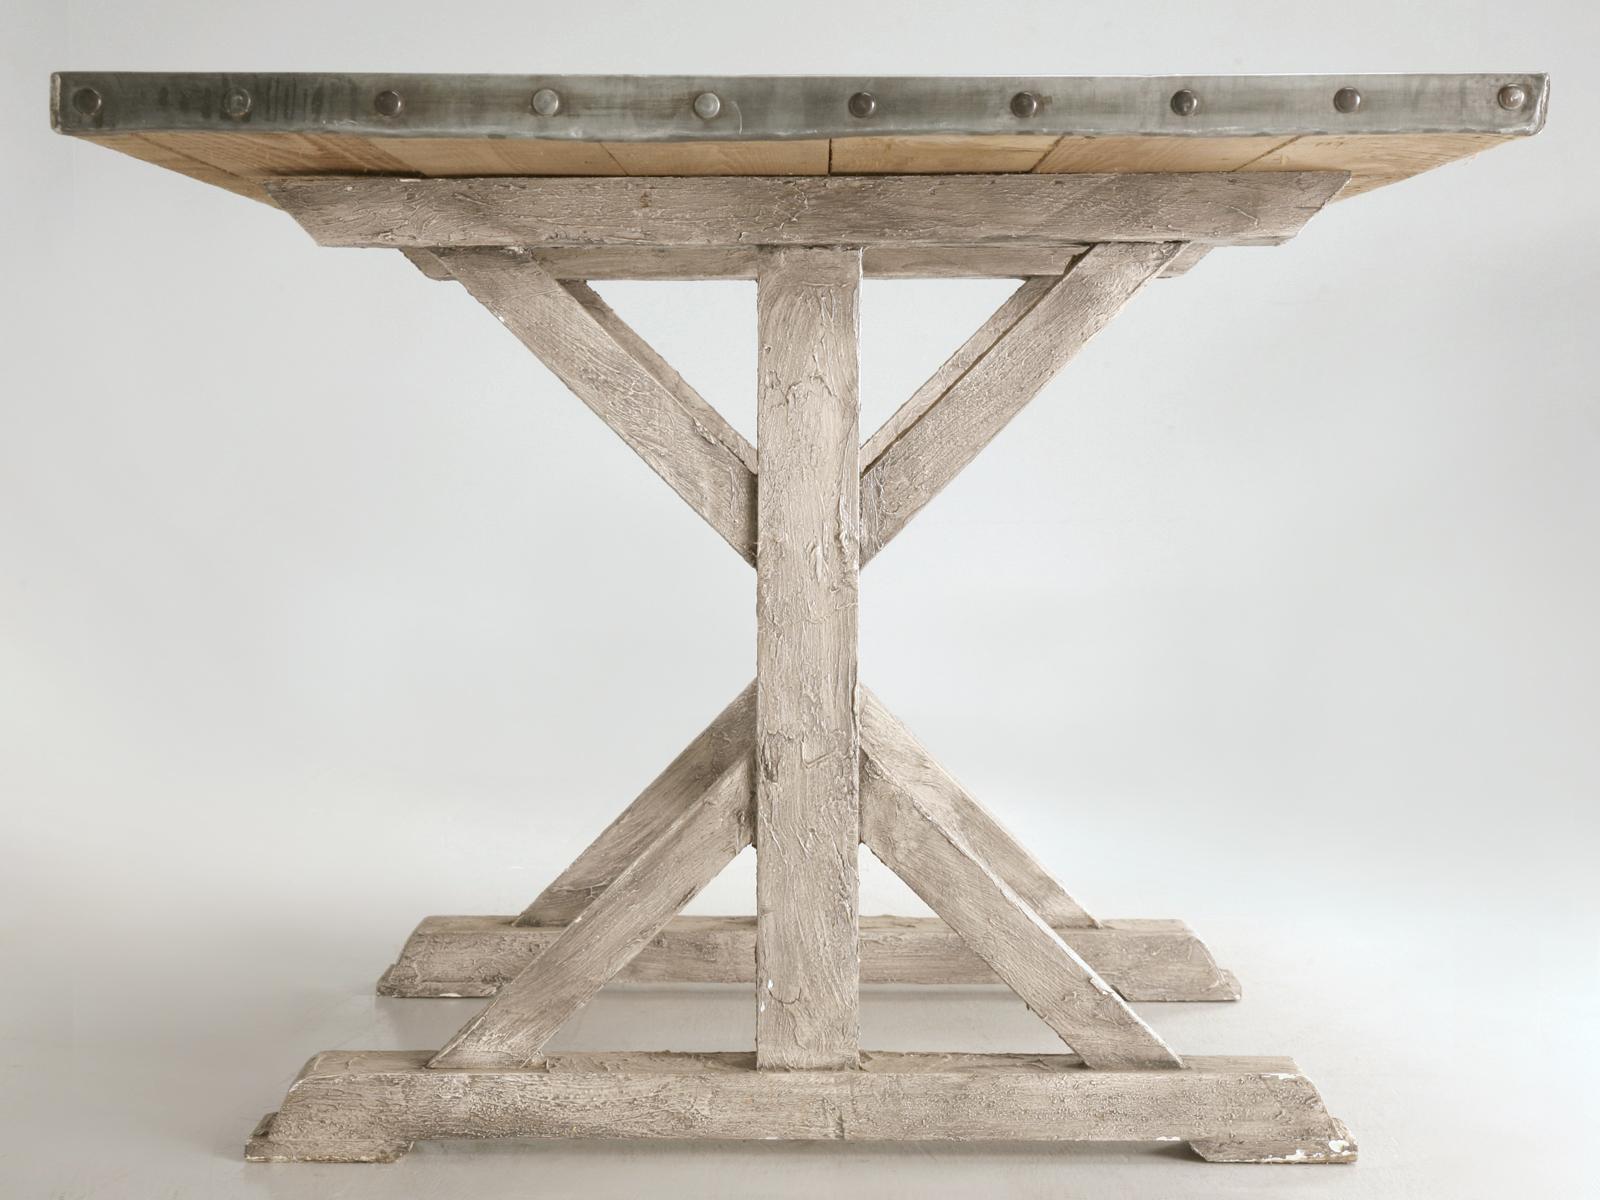 American Aged Handmade Zinc Top Dining Table with Painted Base in Any Dimension